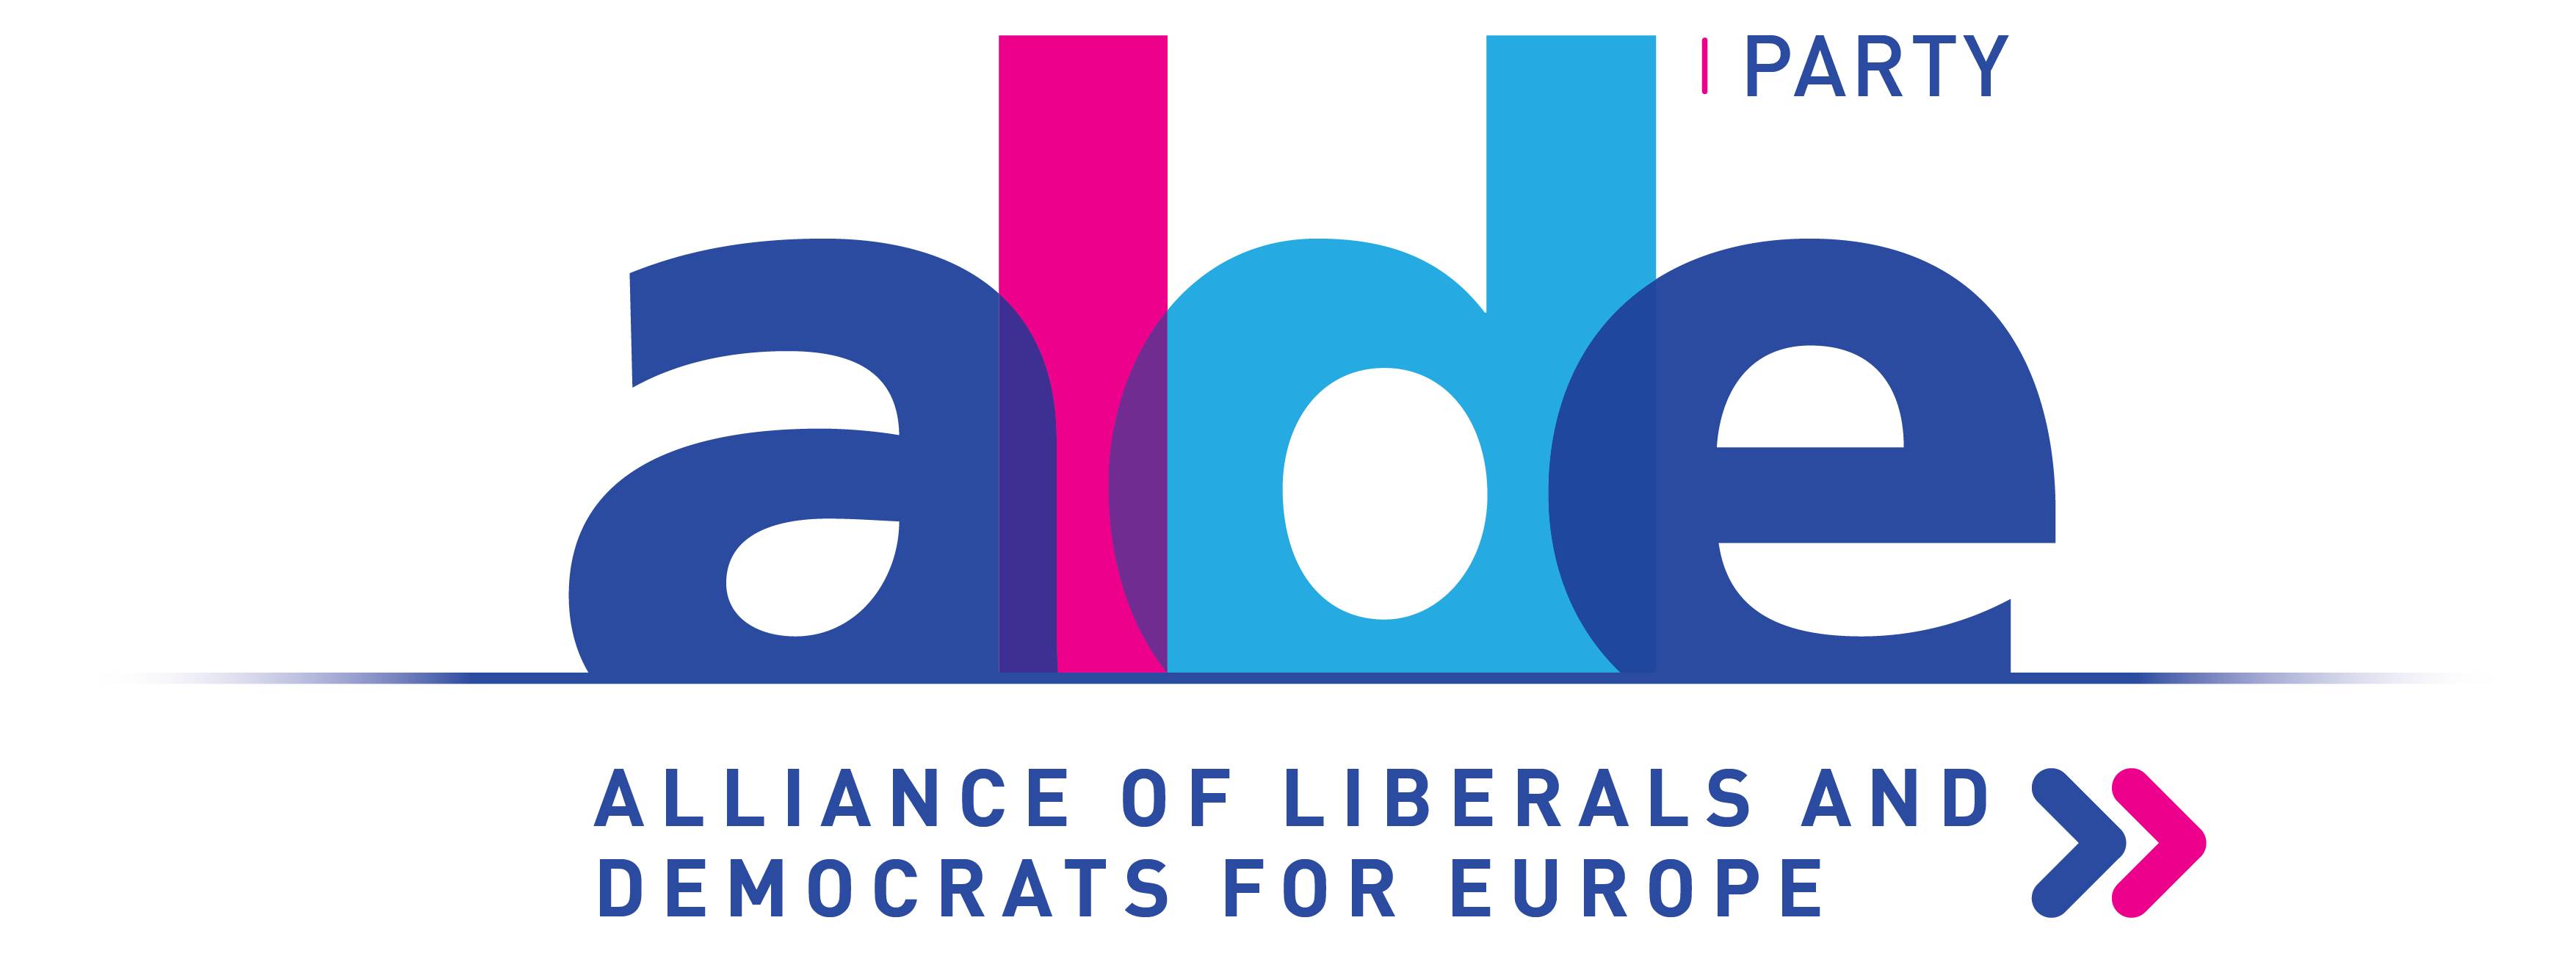 logo for Alliance of Liberals and Democrats for Europe Party